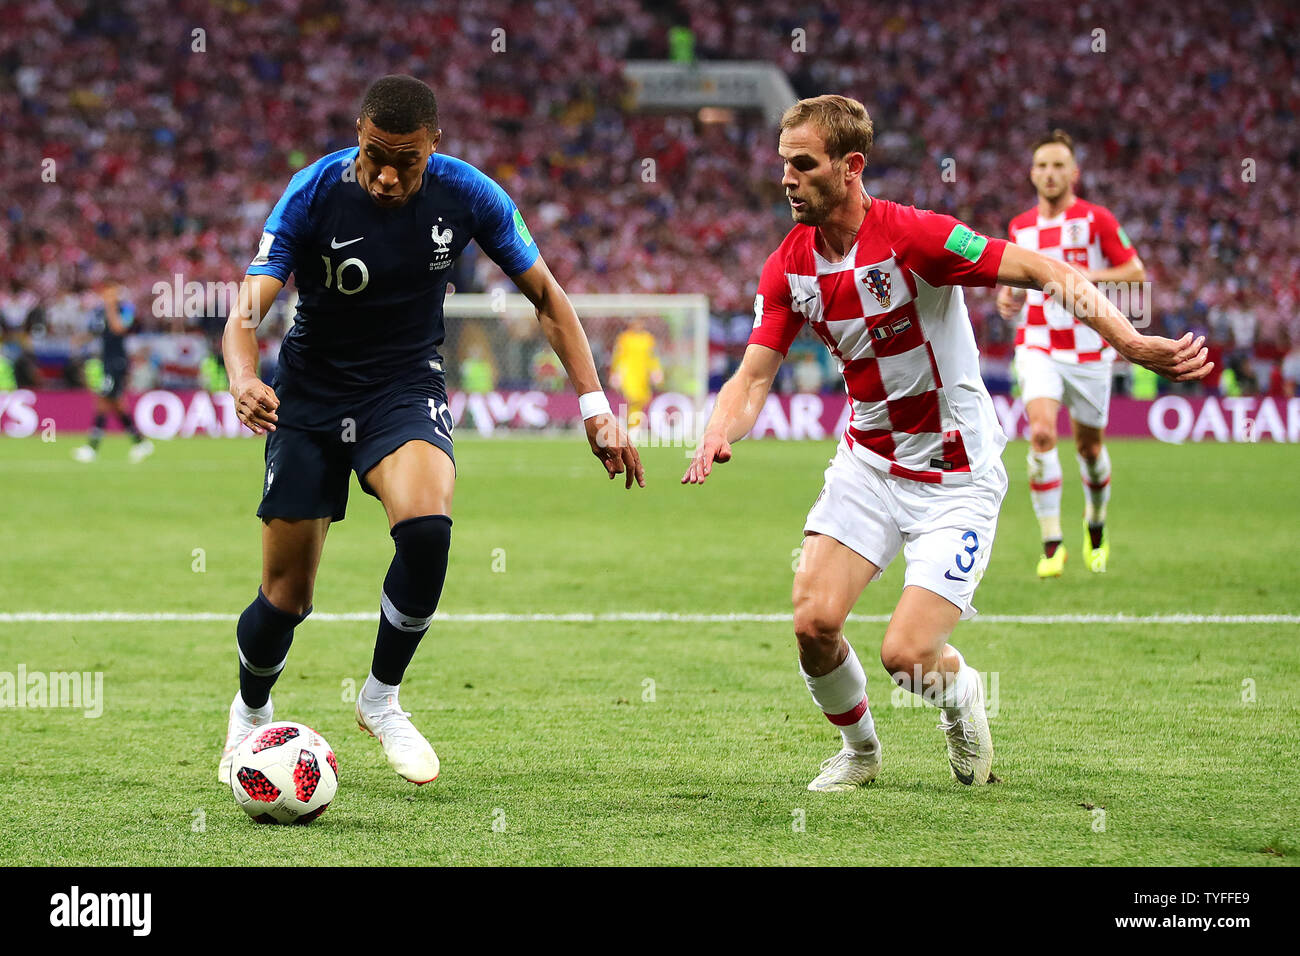 Kylian Mbappe of France runs at Ivan Strinic of Croatia during the 2018 FIFA World Cup final match at Luzhniki Stadium in Moscow, Russia on July 15, 2018. France beat Croatia 4-2. Photo by Chris Brunskill/UPI Stock Photo